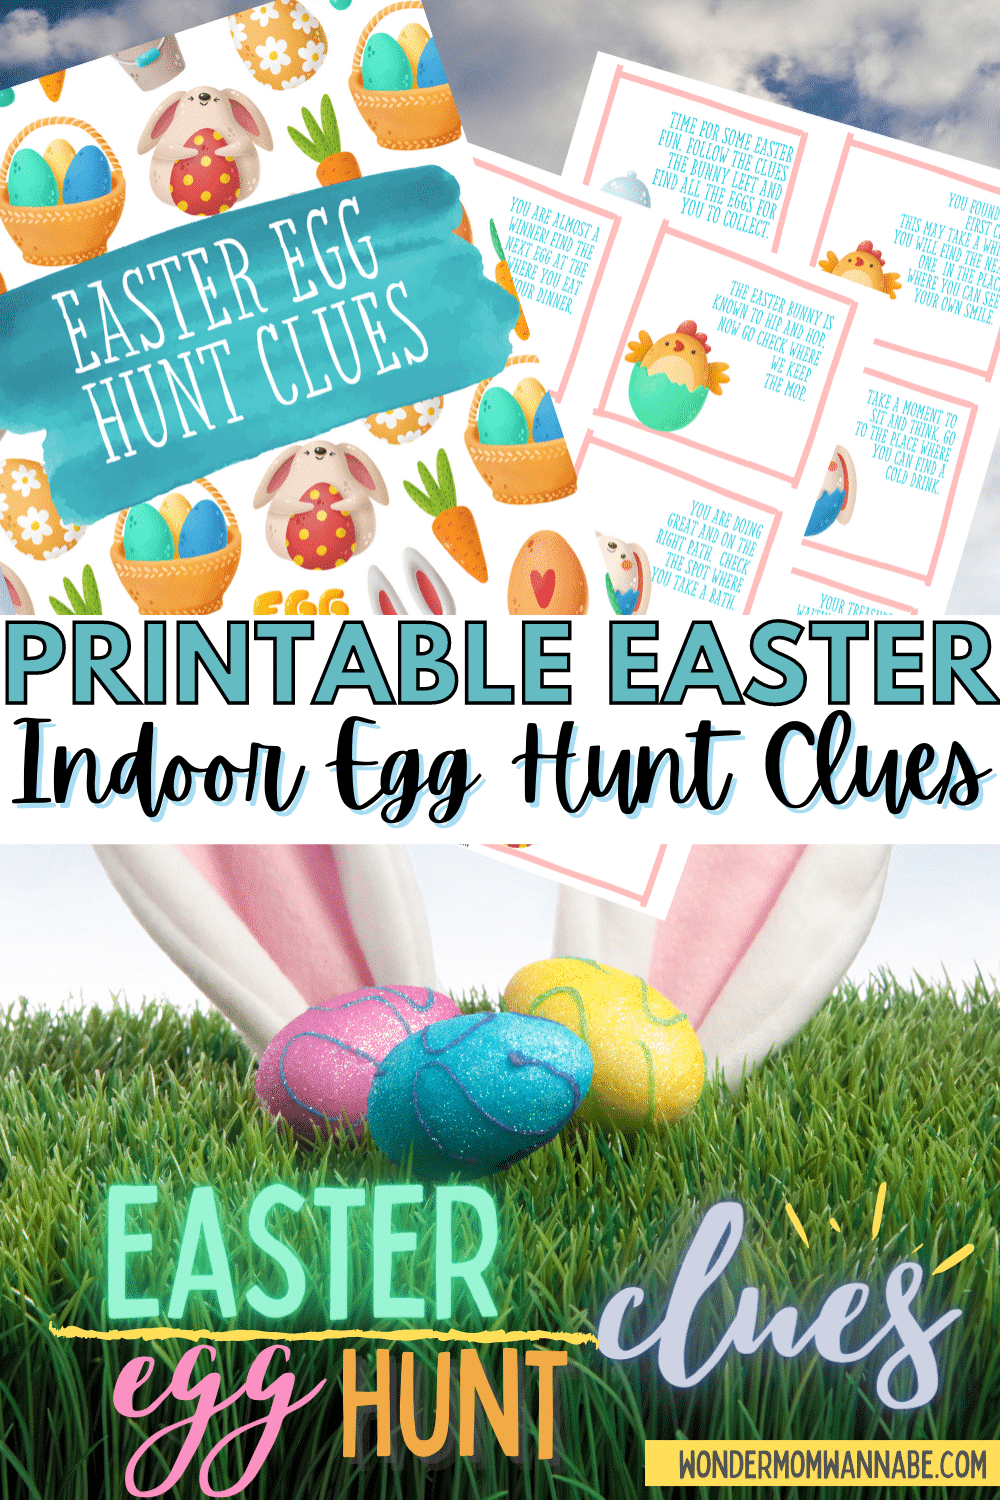 These free printable Indoor Easter Egg Hunt Clues make it easy to set up a fun scavenger hunt for eggs on Easter morning. #easter #easteregghunt #scavengerhunt #indooreasteregghunt via @wondermomwannab